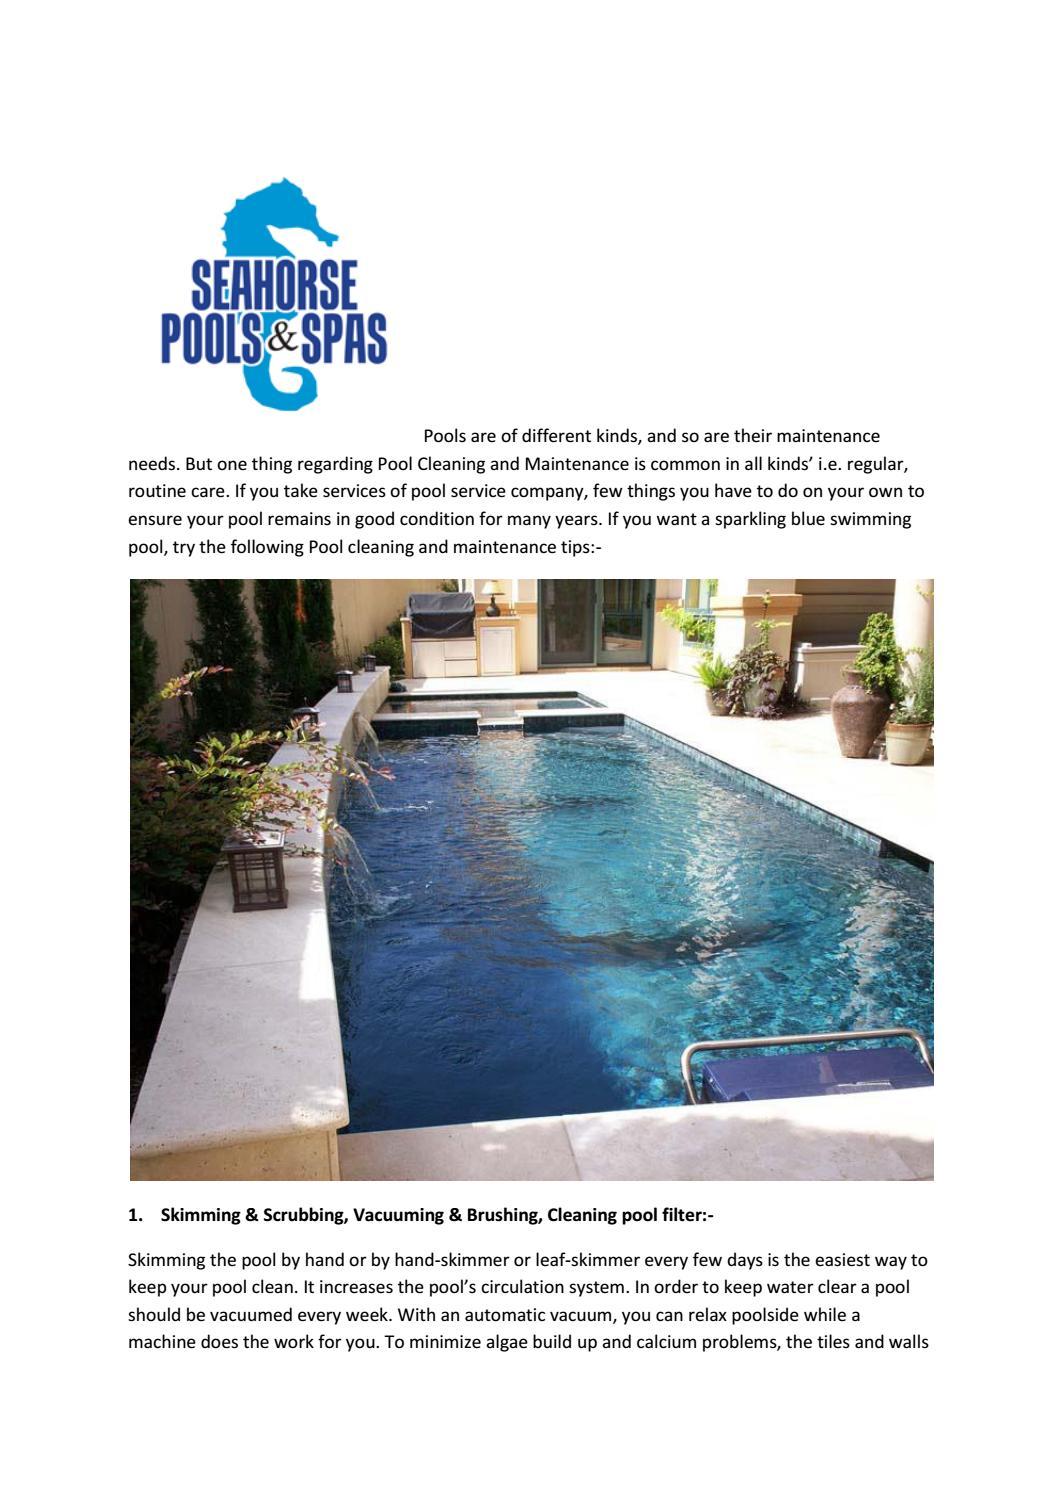 Keep pool water clear, clean with regular care